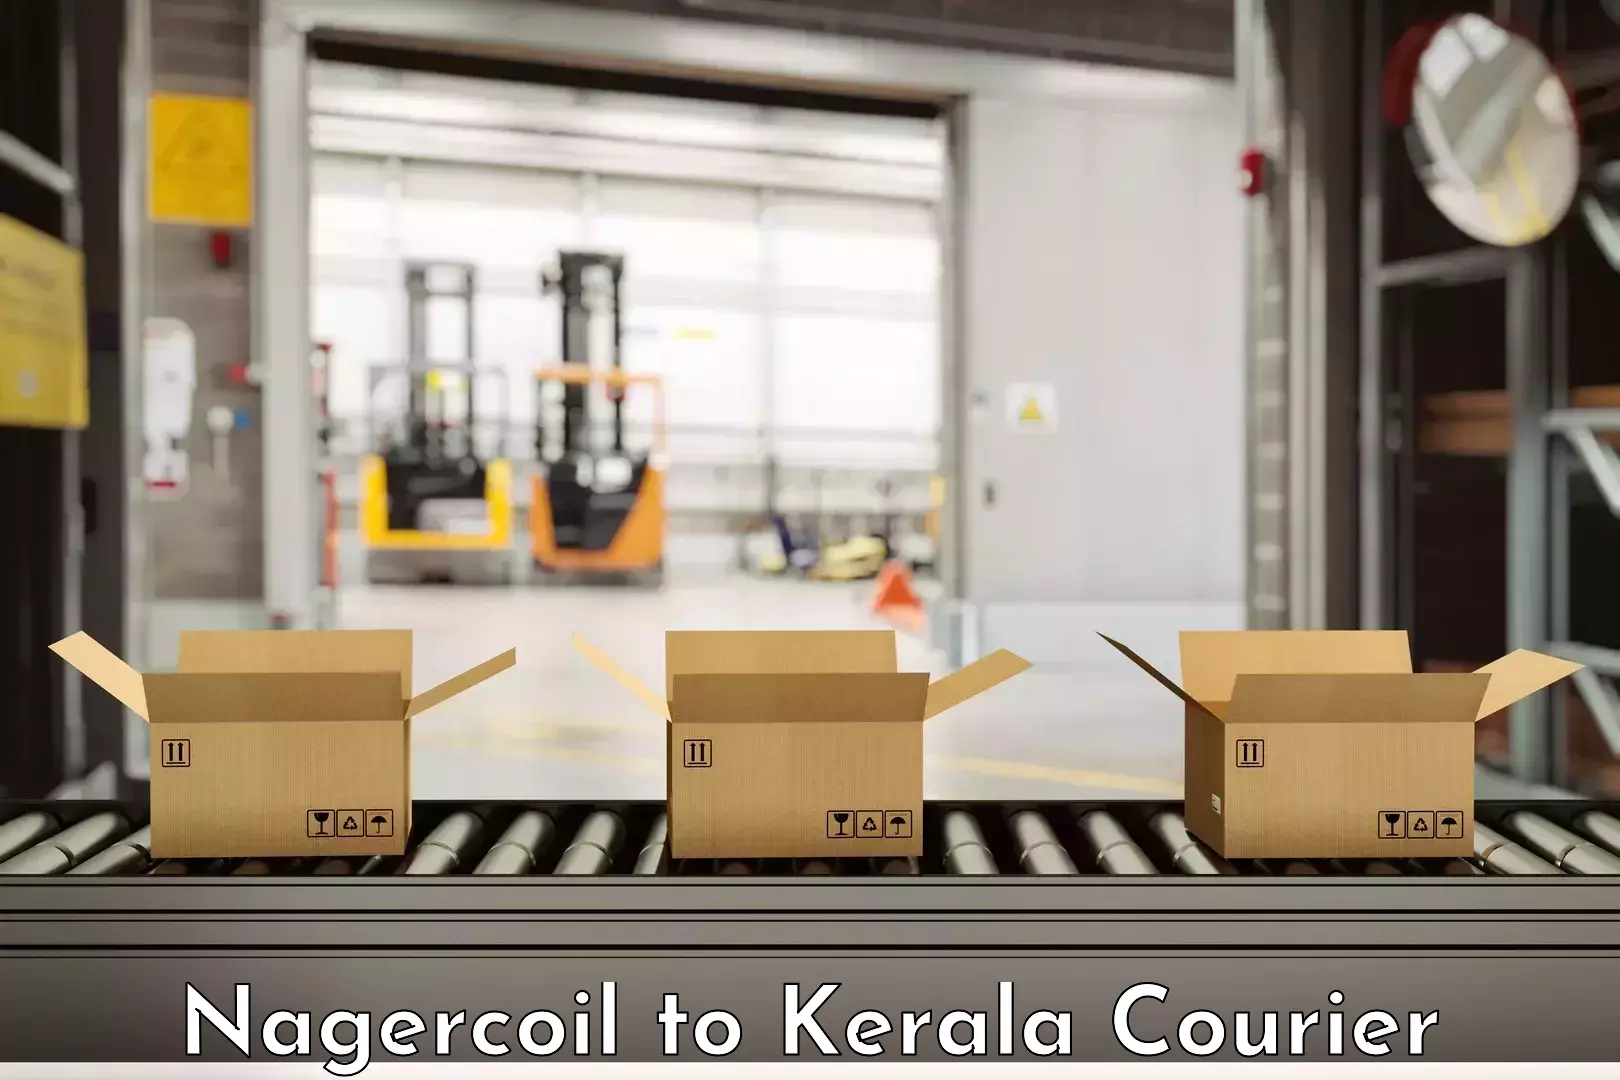 Furniture delivery service Nagercoil to Kalpetta